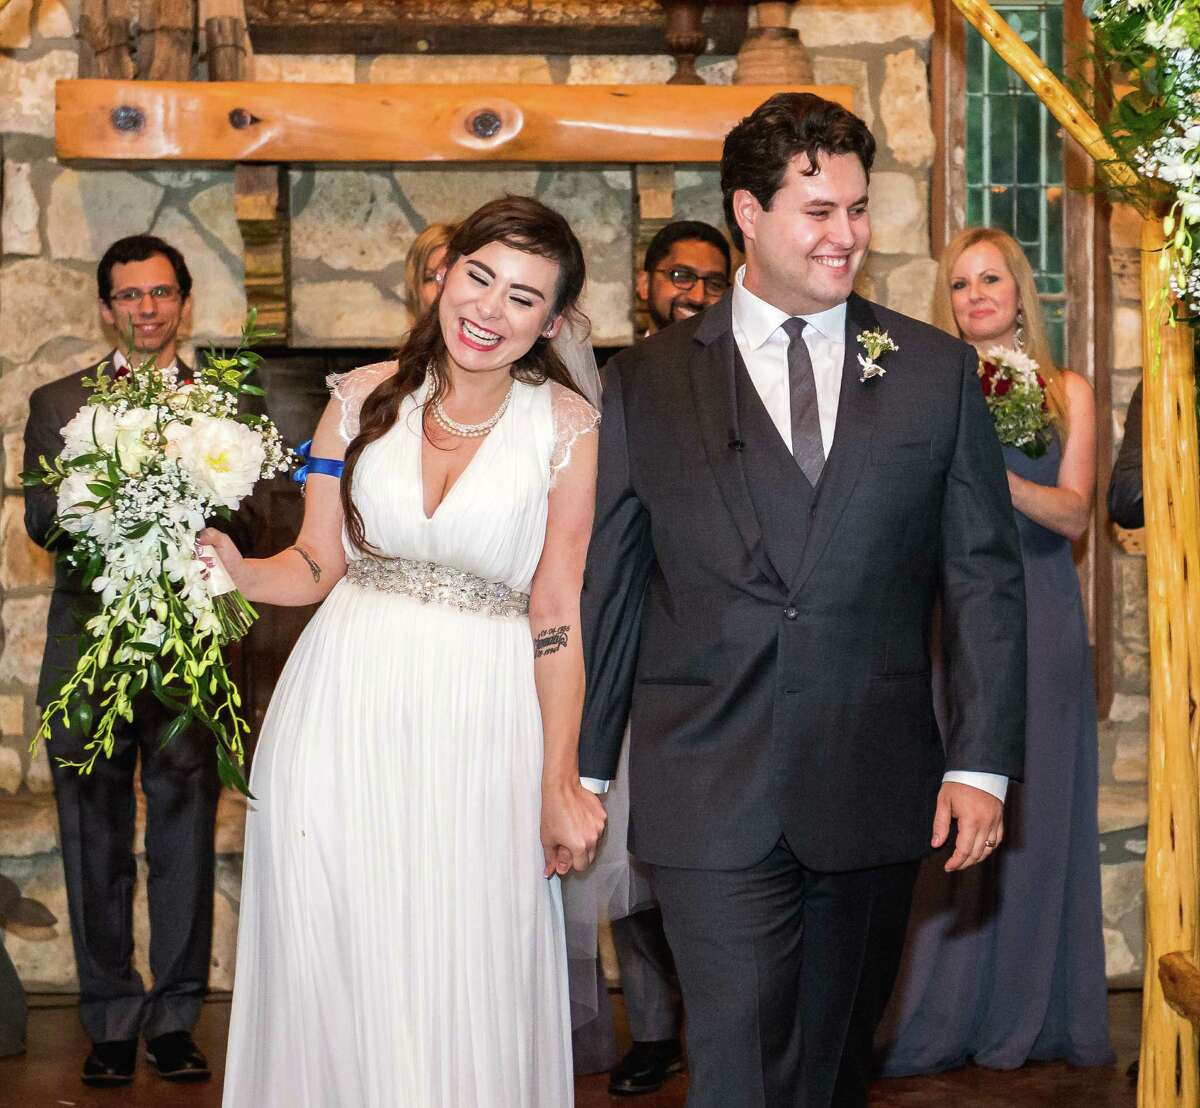 Jacqueline and Jason Altobelli on their wedding day in Wimberley.